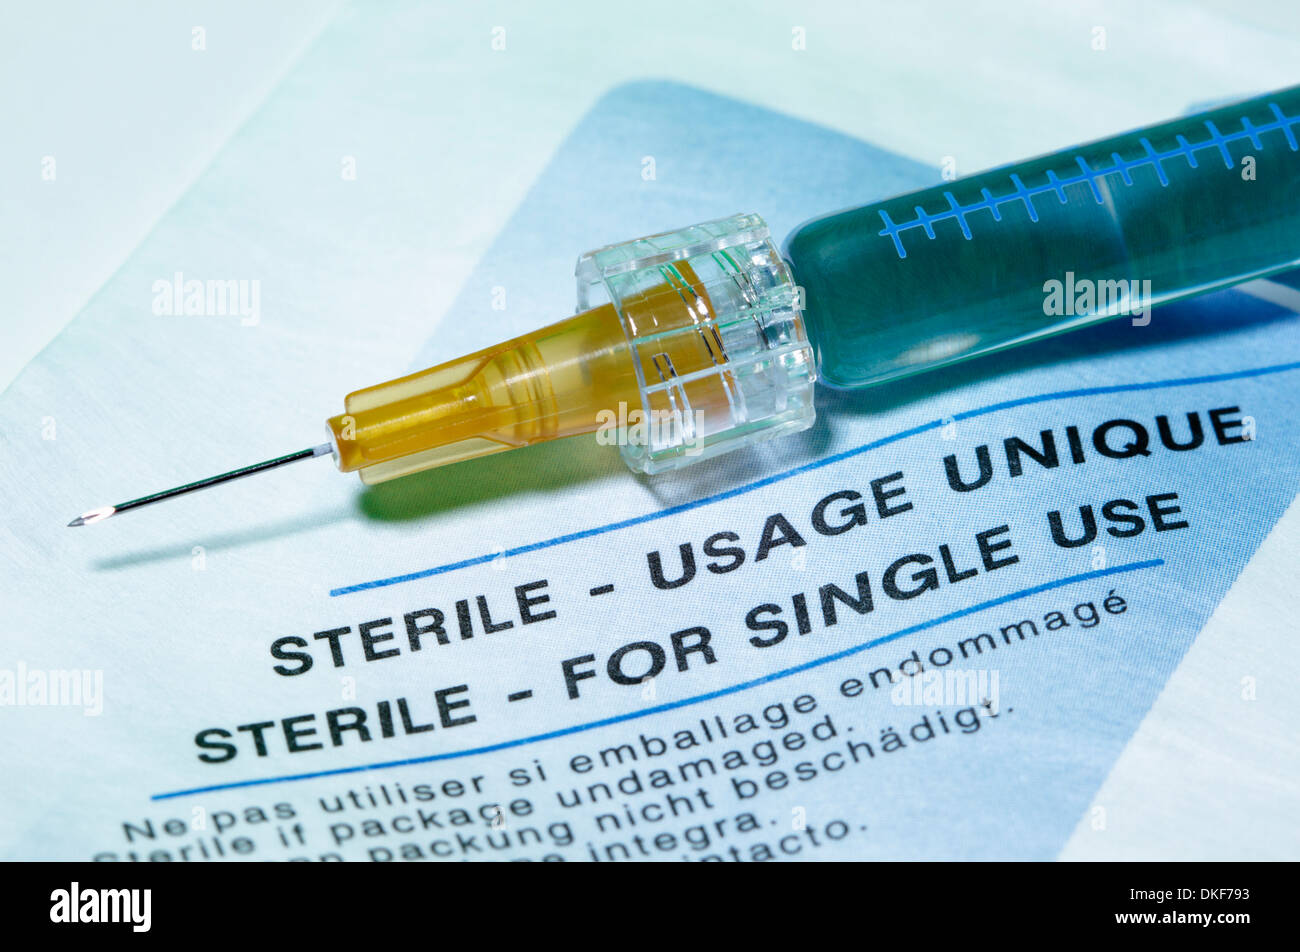 Disposable plastic medical syringe with a hypodermic needle Stock Photo